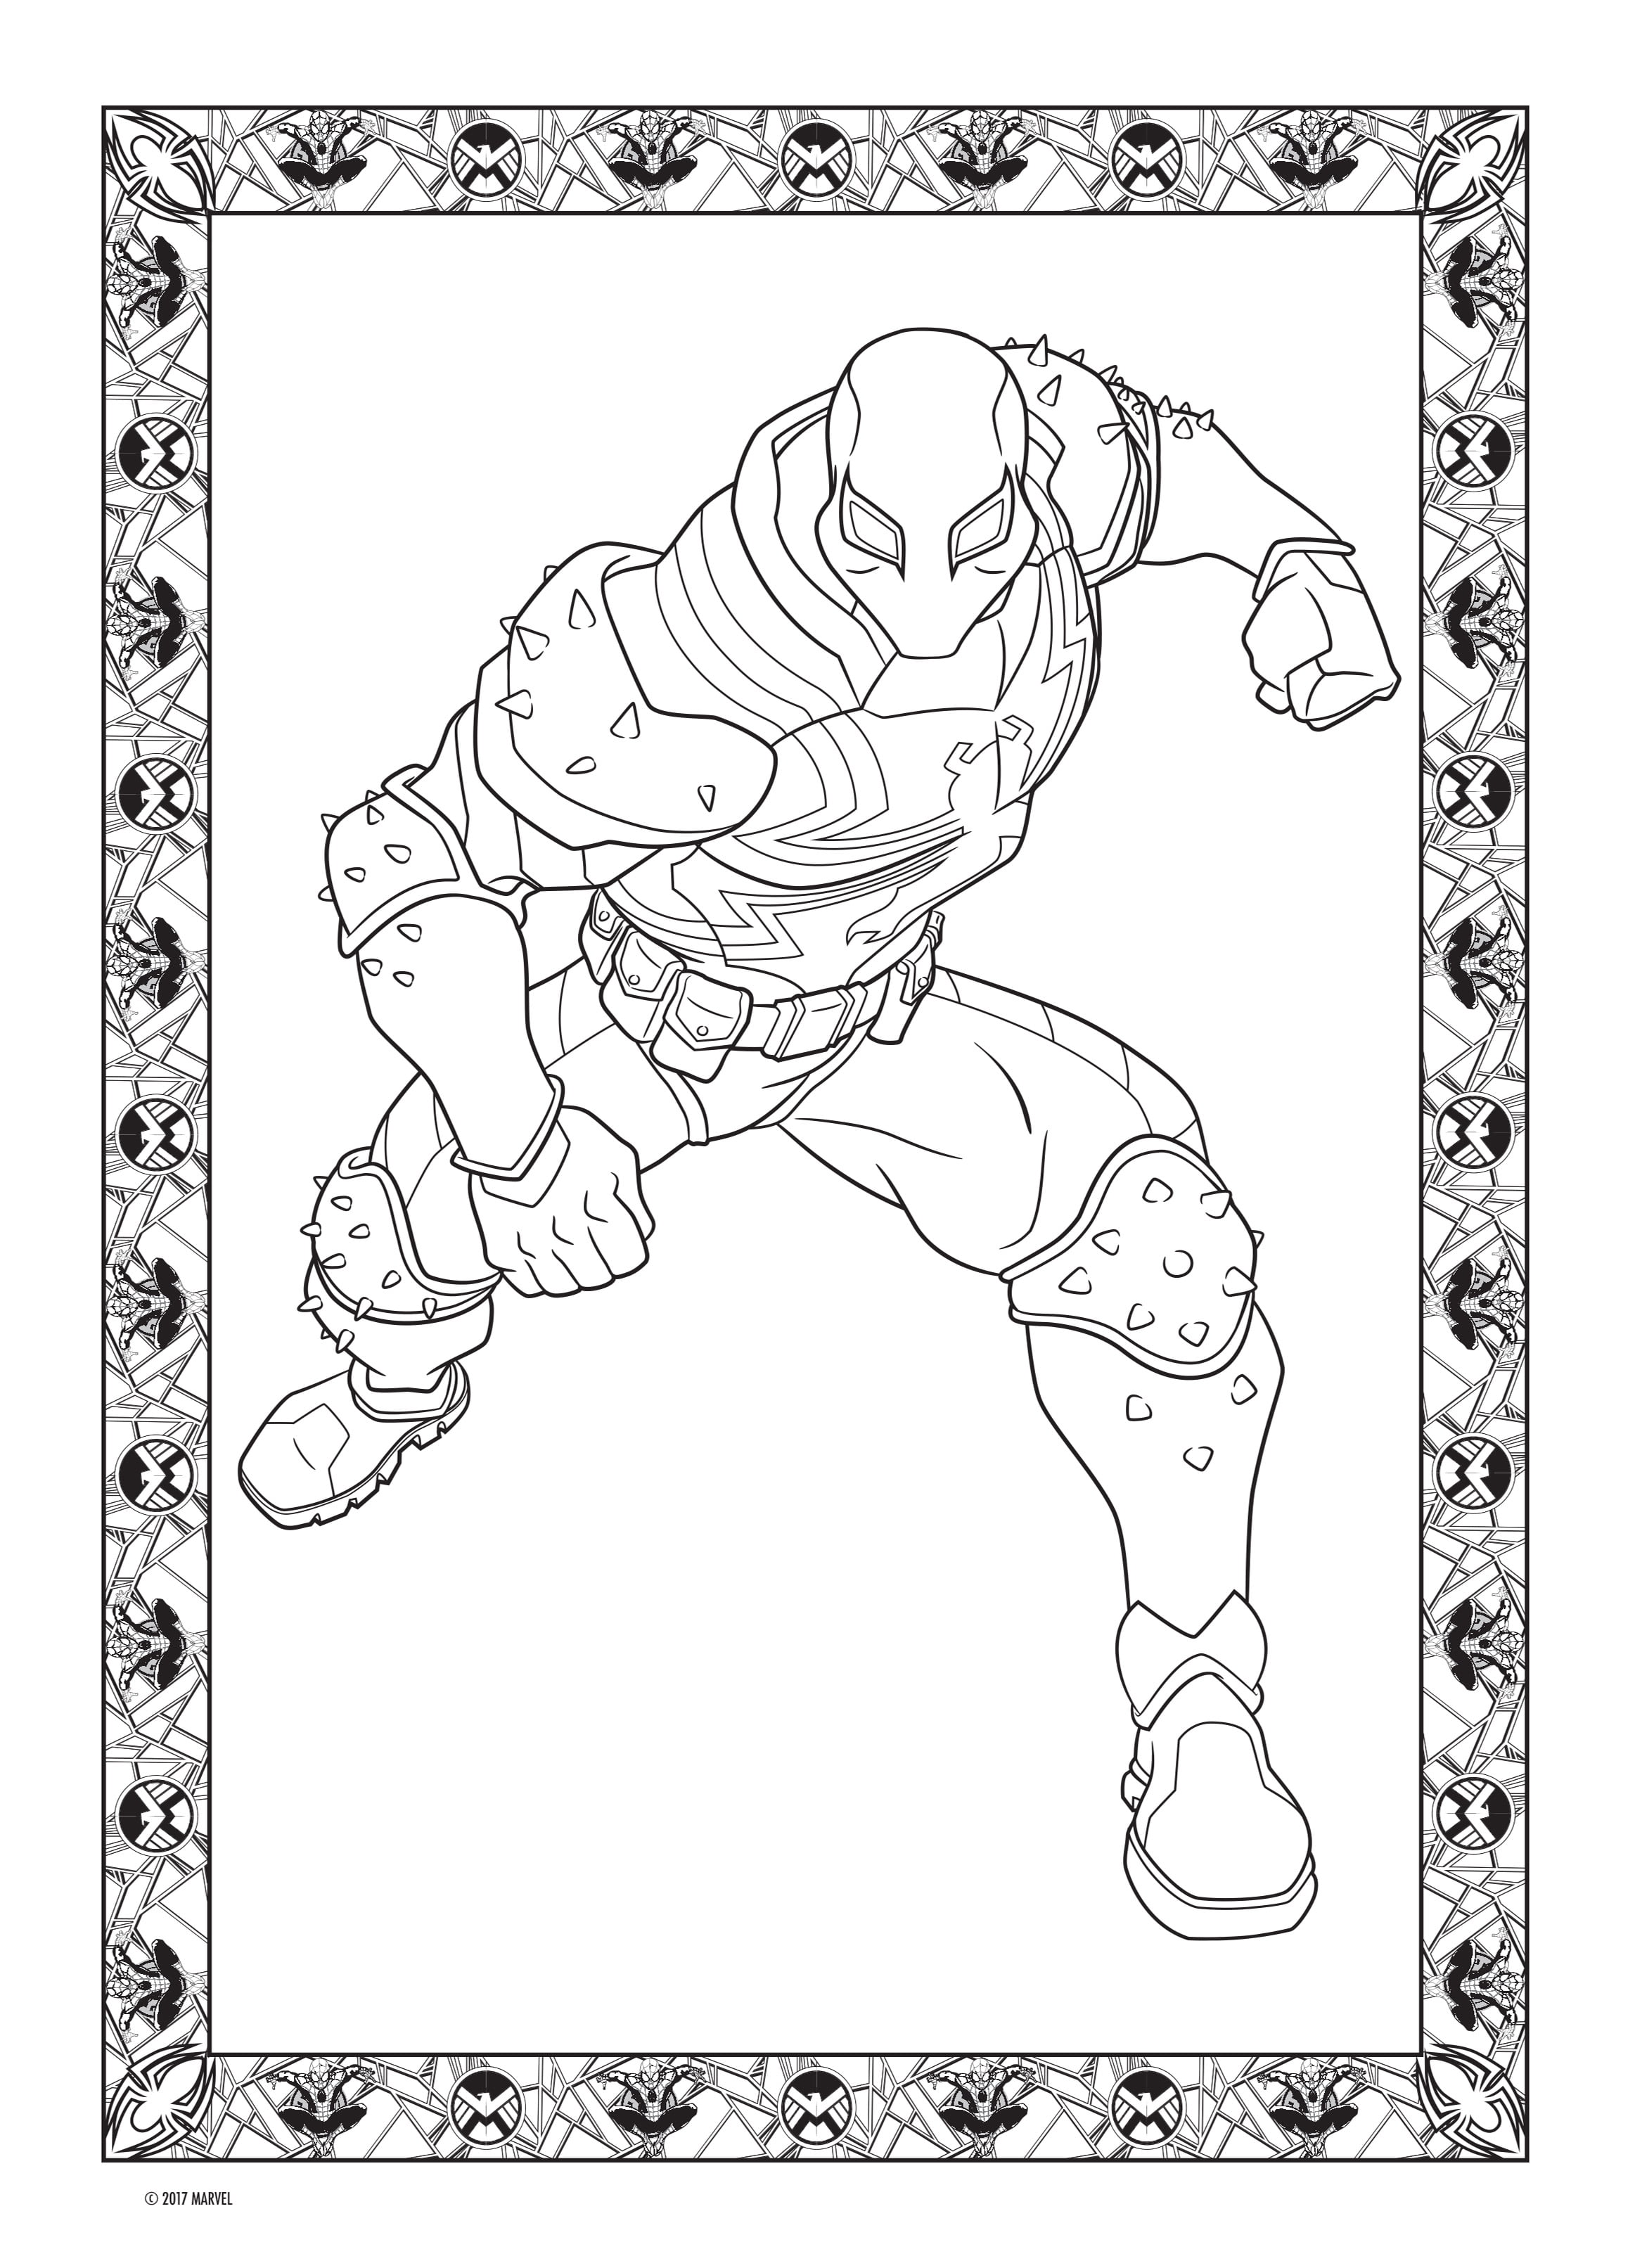 Spiderman Coloring Sheets (Pack of 15) – Coloring Books for Kidz